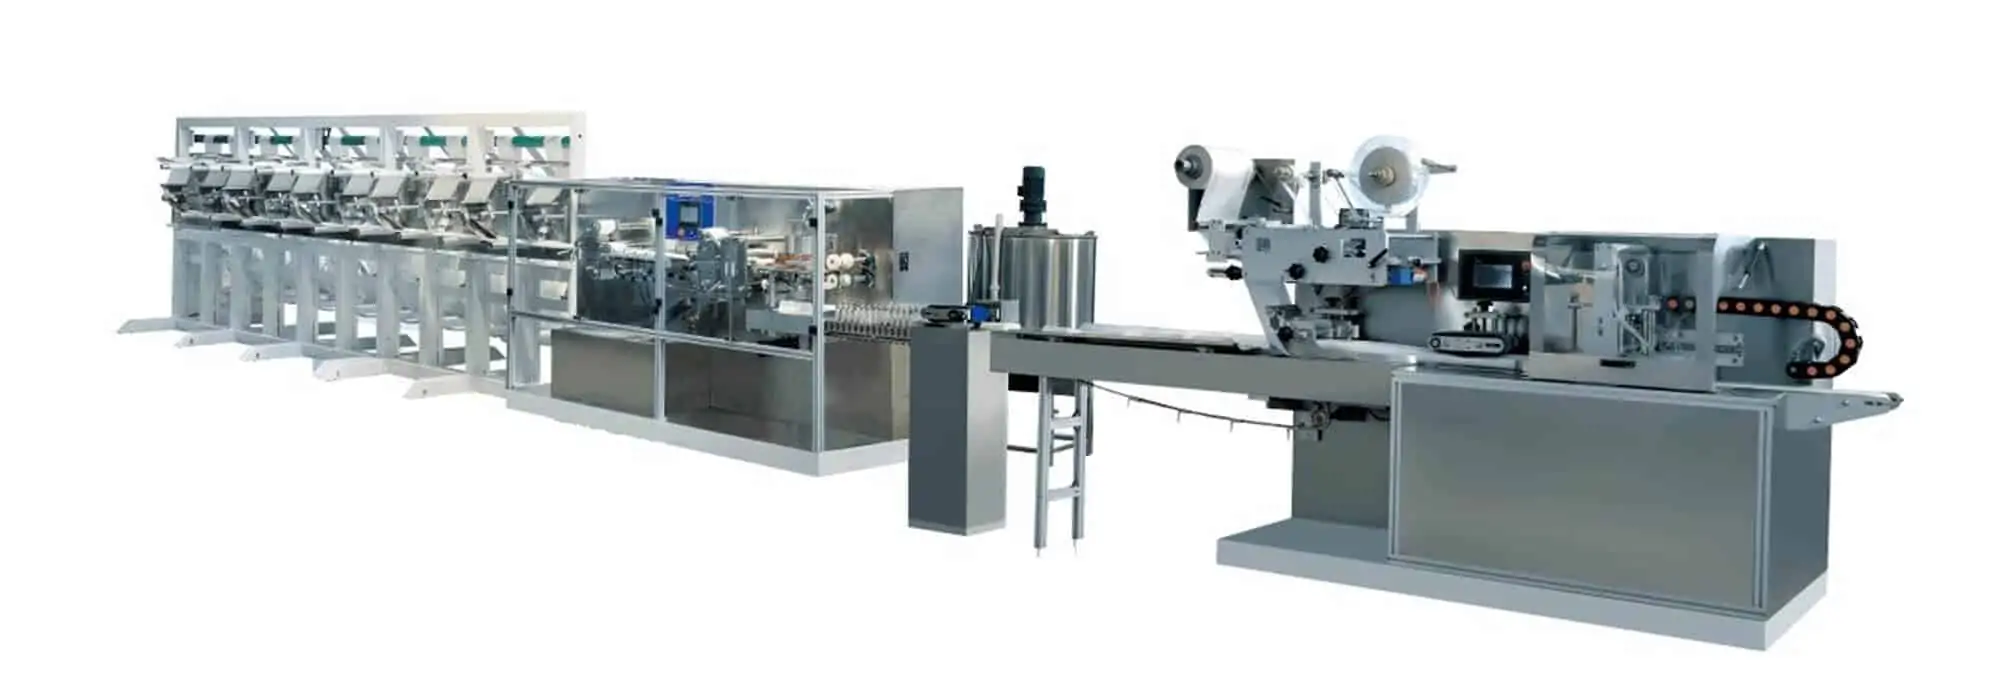 DH 12F Automatic wet wipes production line 1 - DH-12F Automatic wet wipes production line (30-120pcs/pack)